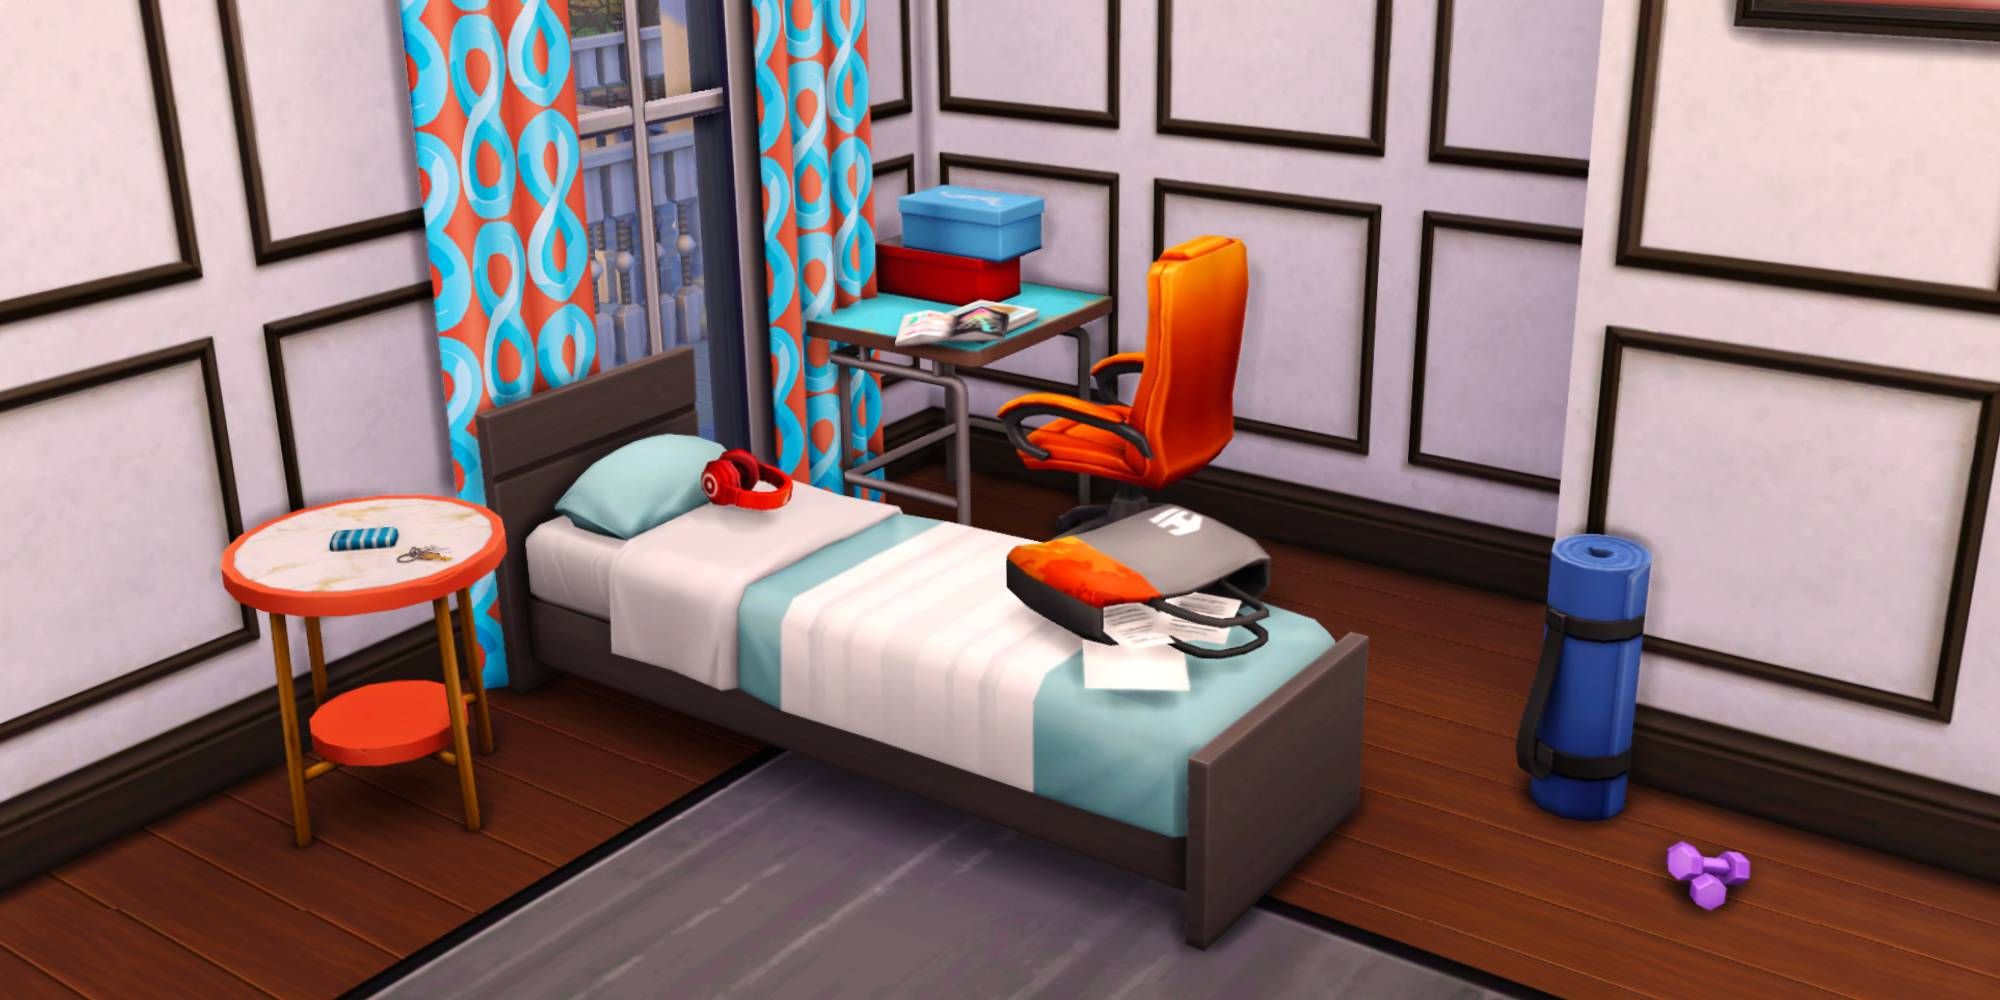 The Sims 4 Simkoos Clutter Dump Set displayed in a bedroom with blue and orange coloring